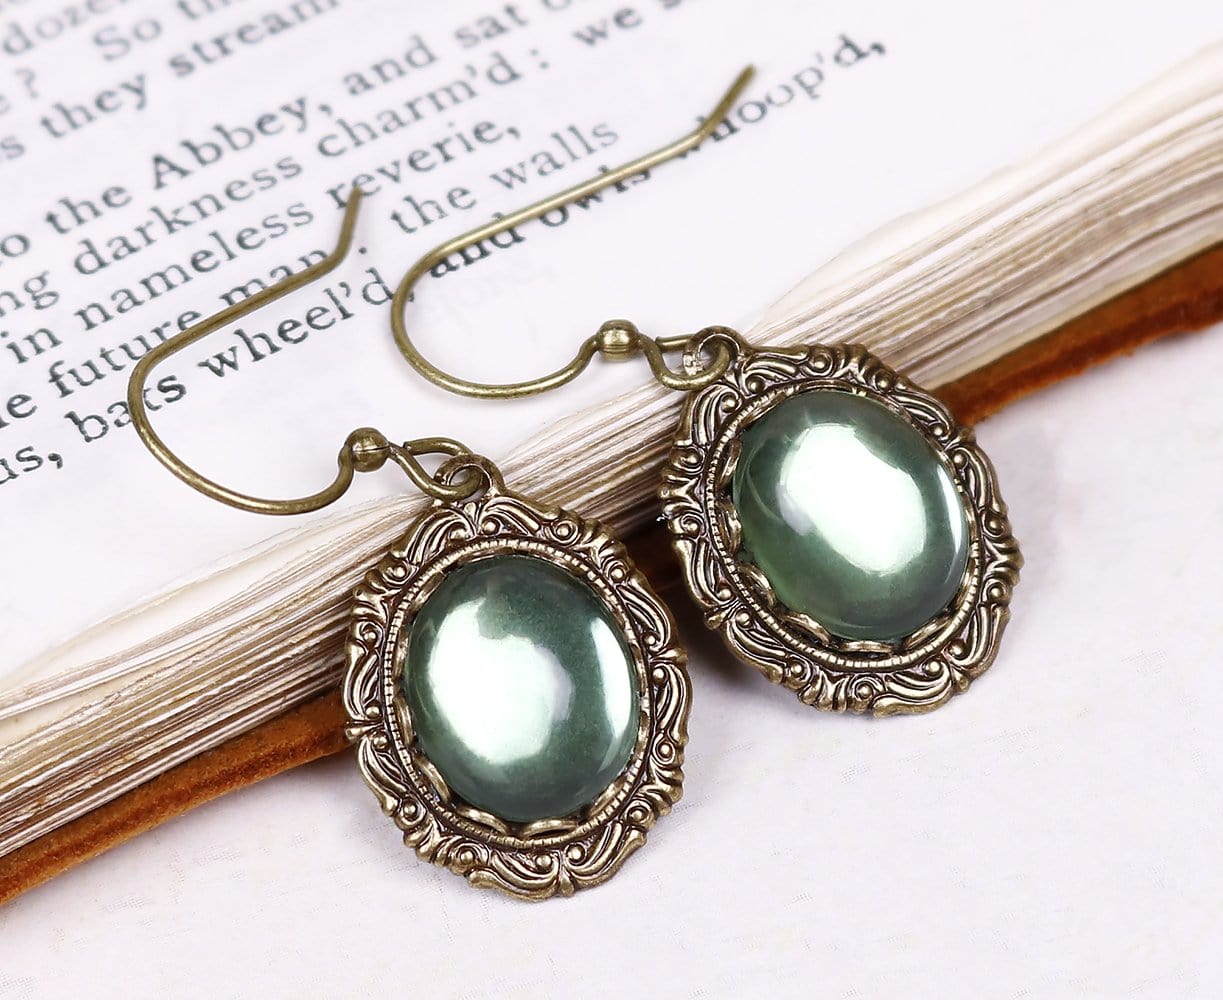 Perceval Earrings in Tourmaline - Antiqued Brass by dosha of Rabbitwood & Reason